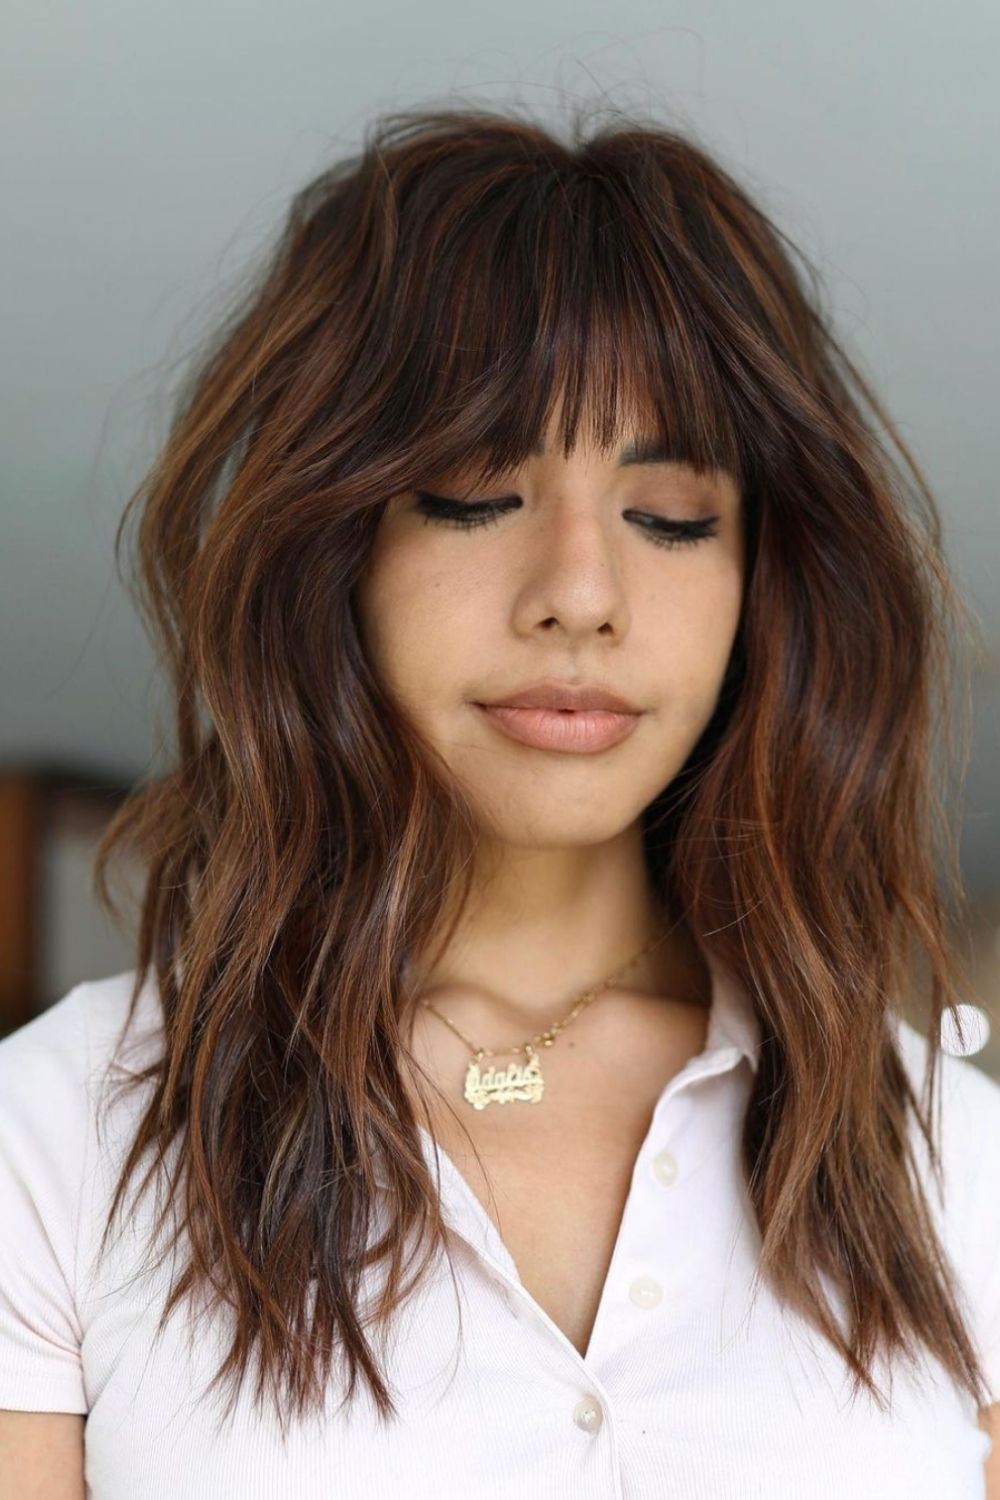 24 Best Layered Haircuts With Bangs for medium length hairstyle!